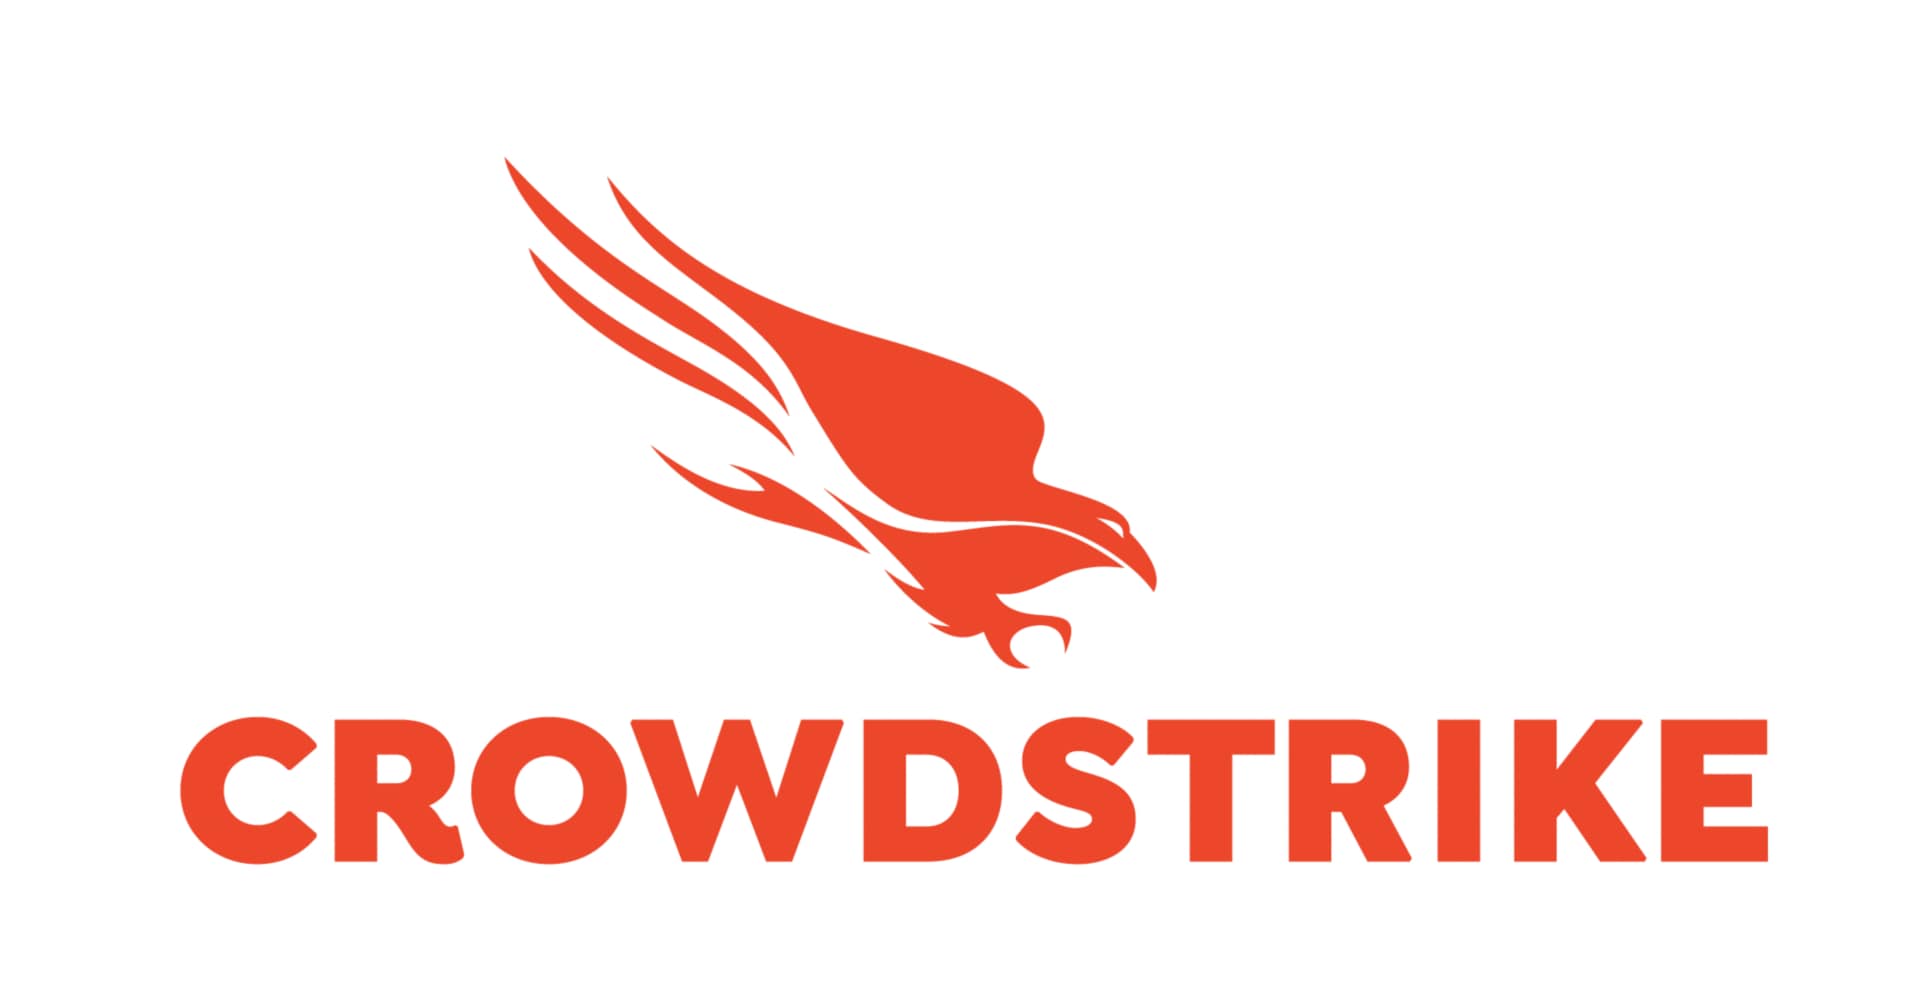 CrowdStrike 11-Month Insight for Mobile (Requires Falcon for Mobile)